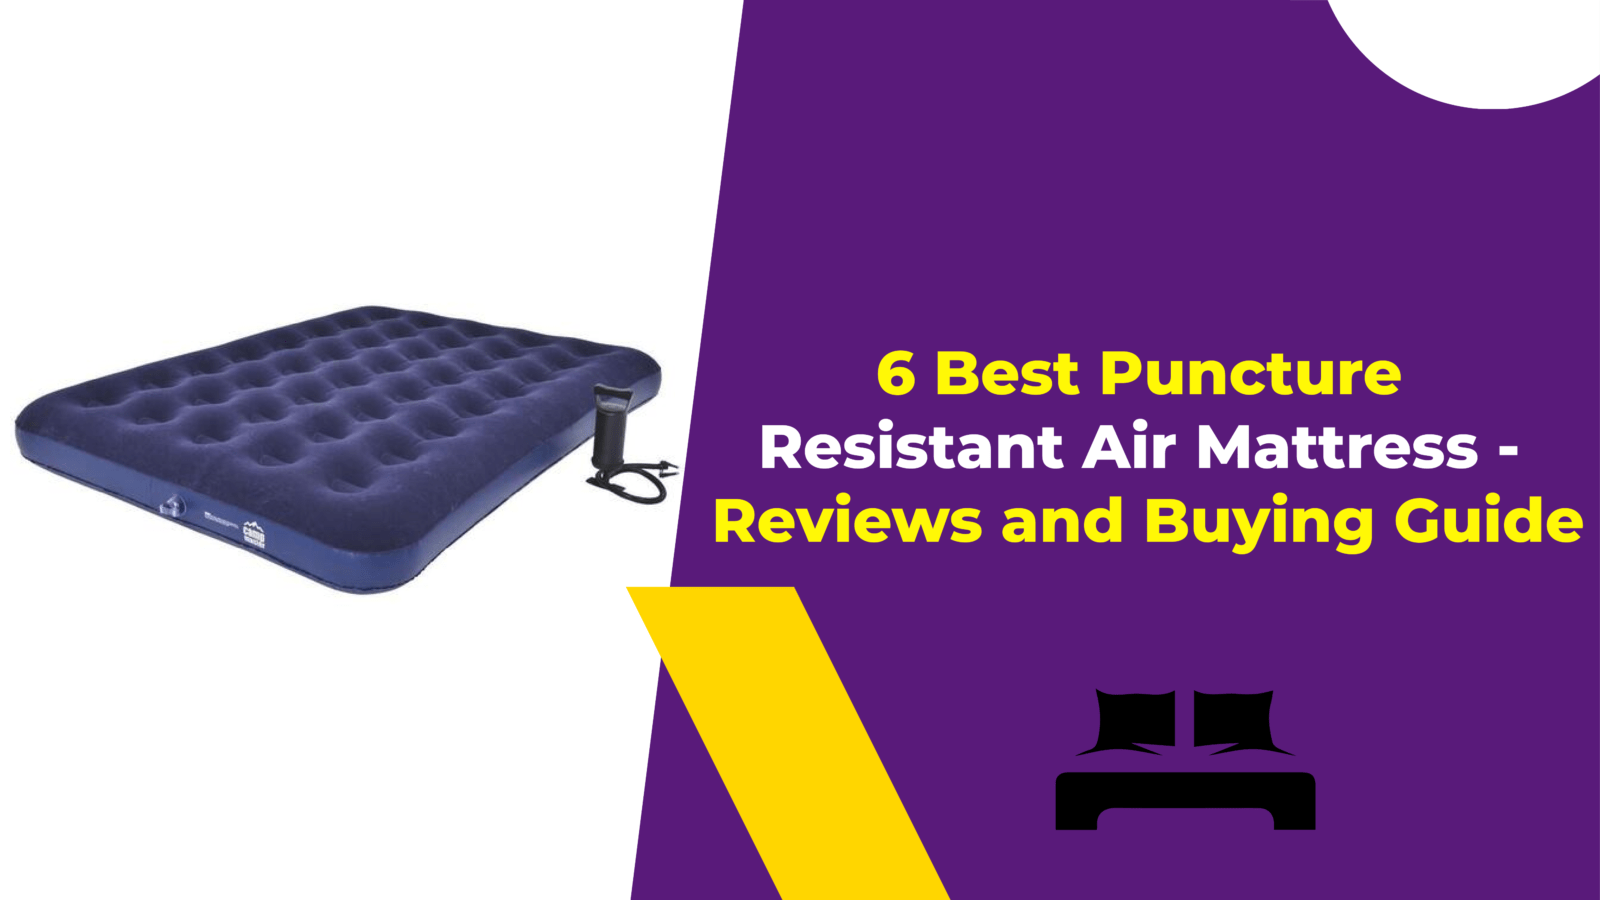 puncture resistant air mattress for backpacking